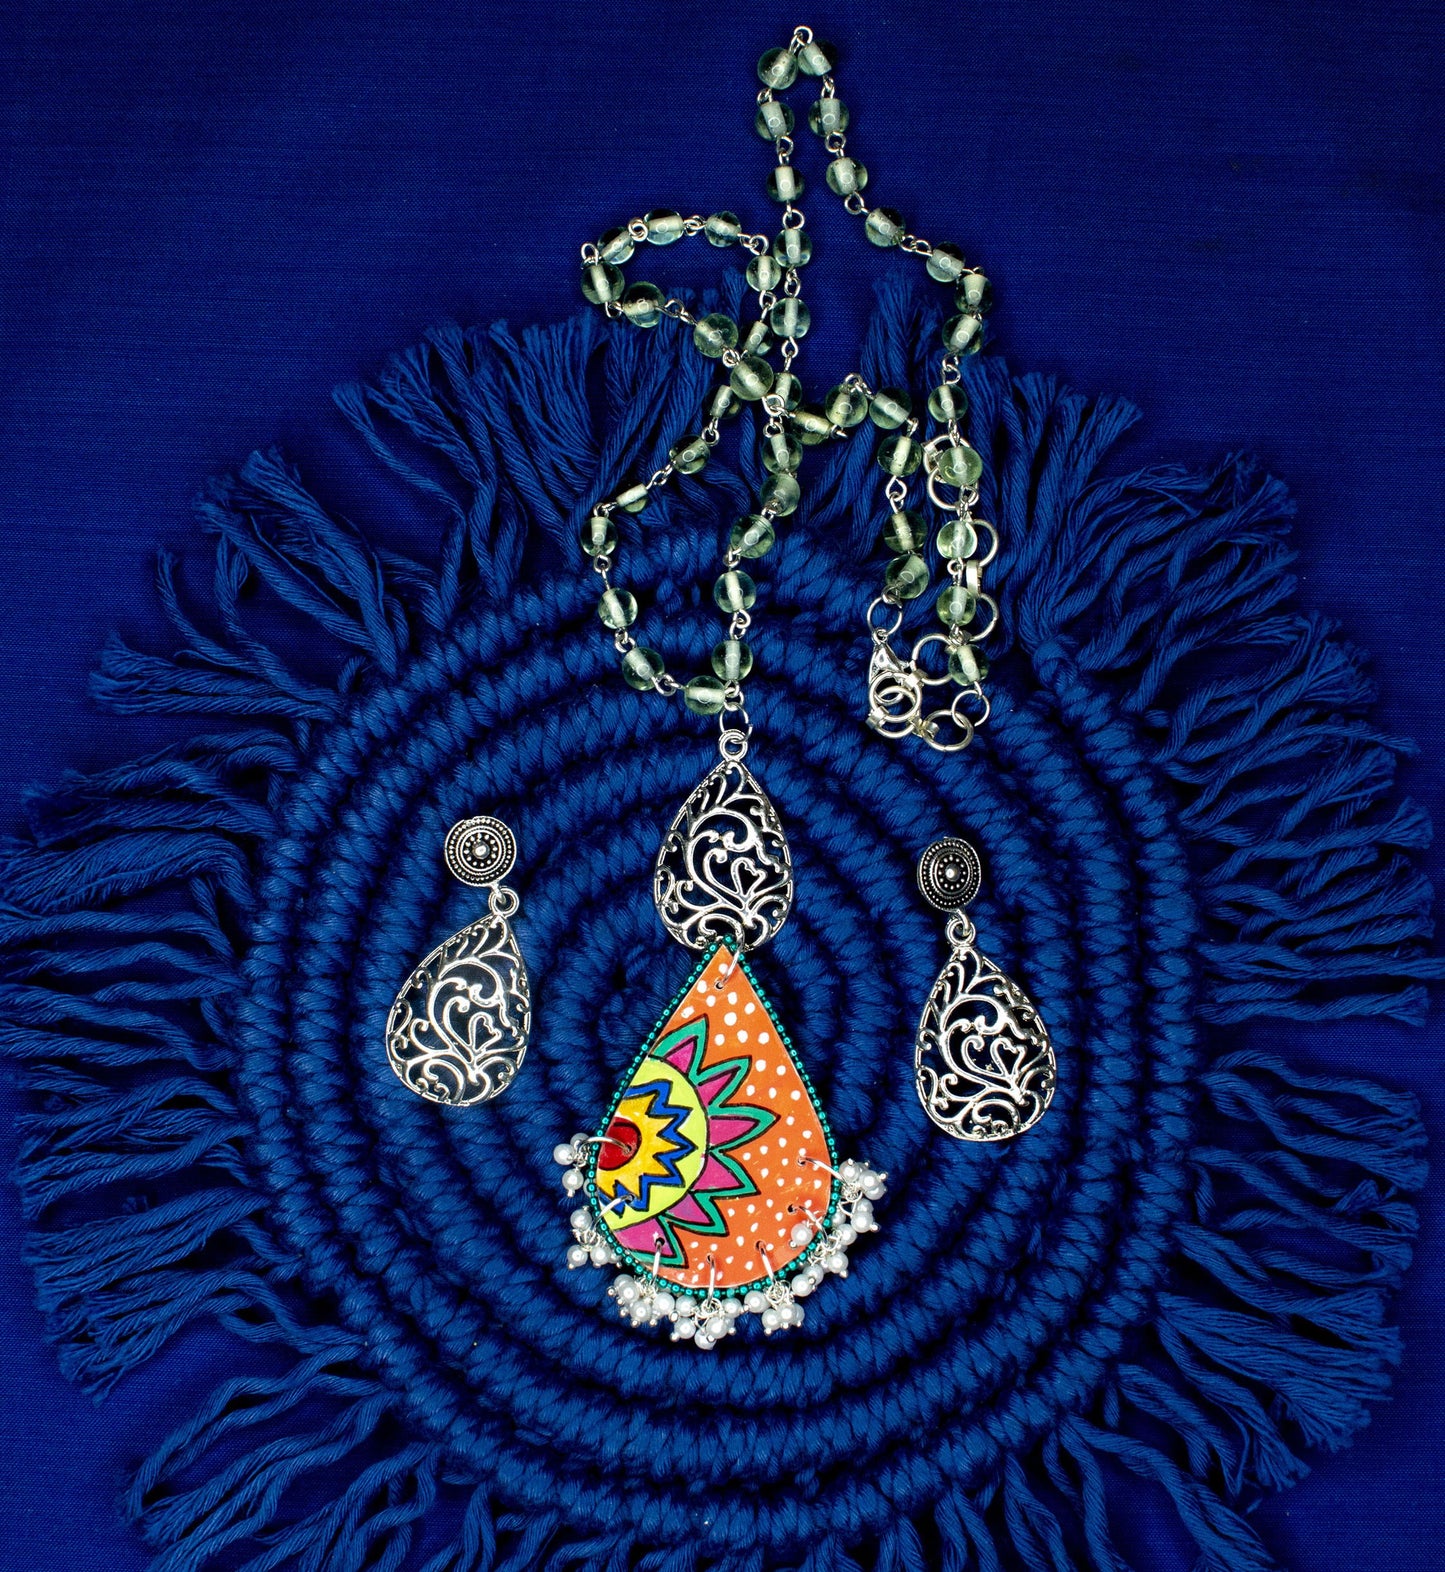 Embroidery Jewelry, Handmade gifts, Handmade Birthday Gifts, Handcrafted products, Choker necklace, Mid length Necklace, Long necklace available at affordable price. Lightweight, Beautiful Hadmade Jewelry, Handmade Earrings, Handpainted Jewelry, Hadmade Necklace, Handmade Necklace Sets, Handmade Gifts for best friend